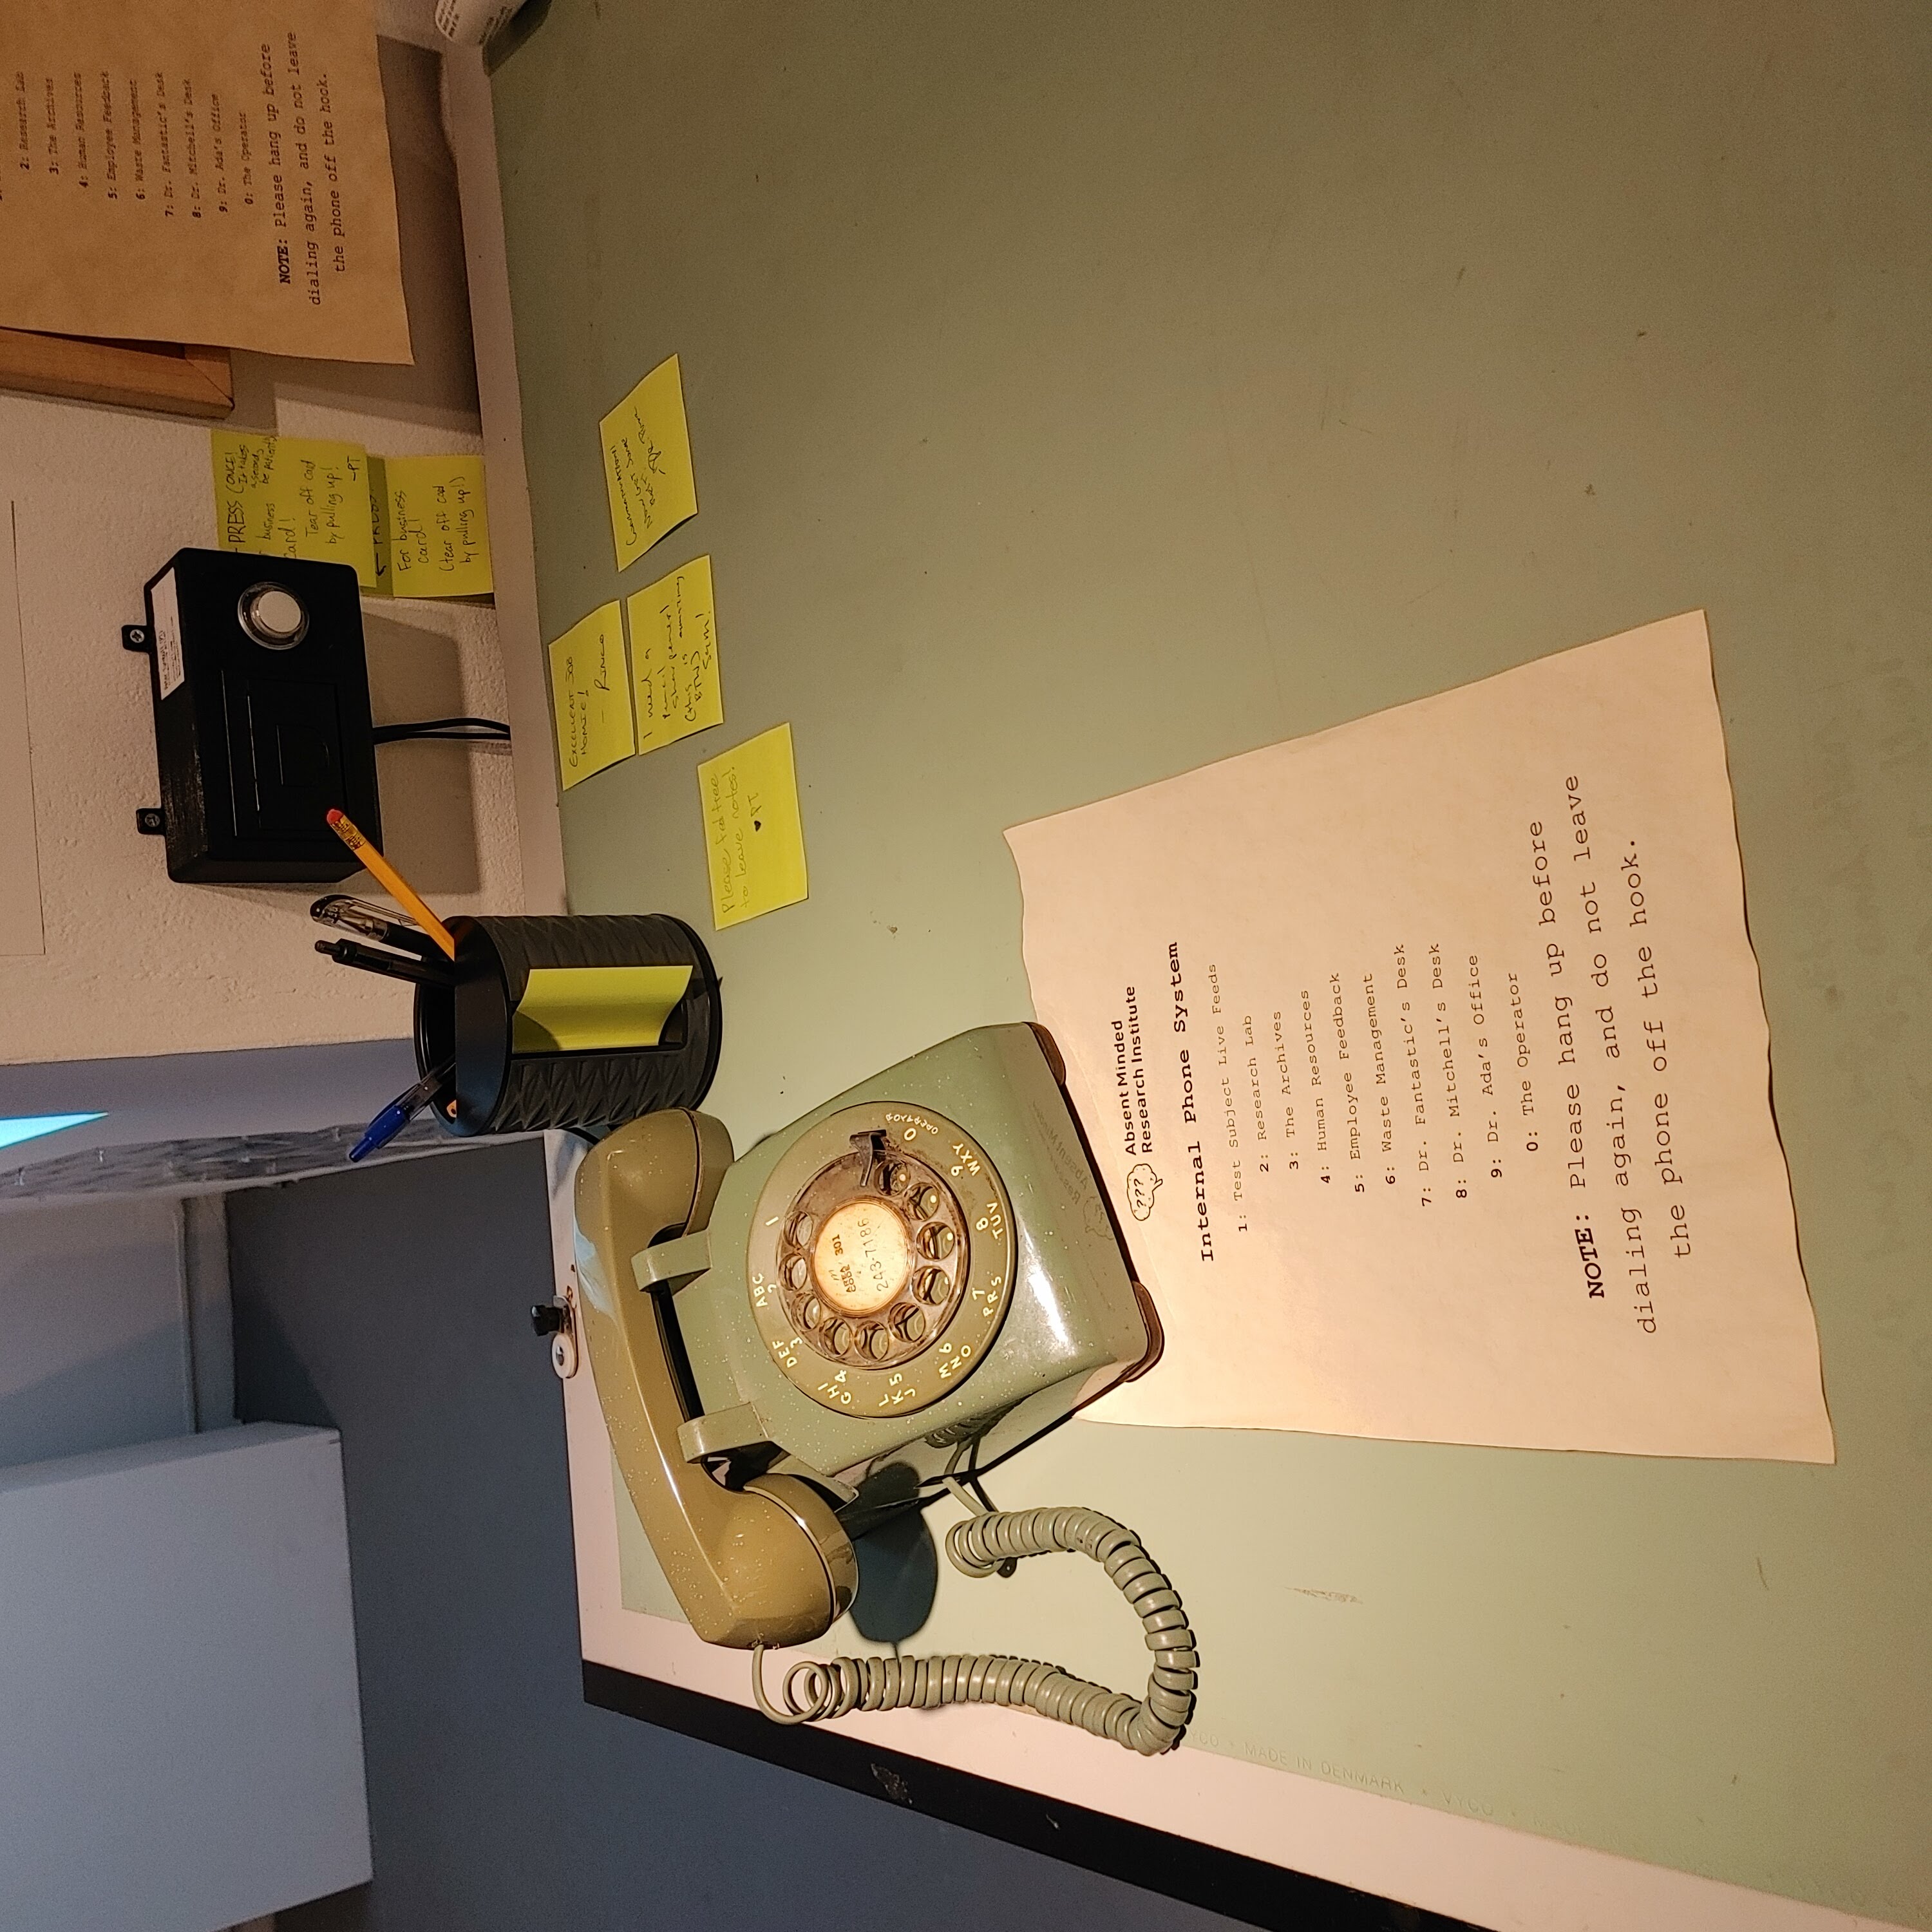 A photo of a green rotary phone on a desk, with a phone menu next to it.